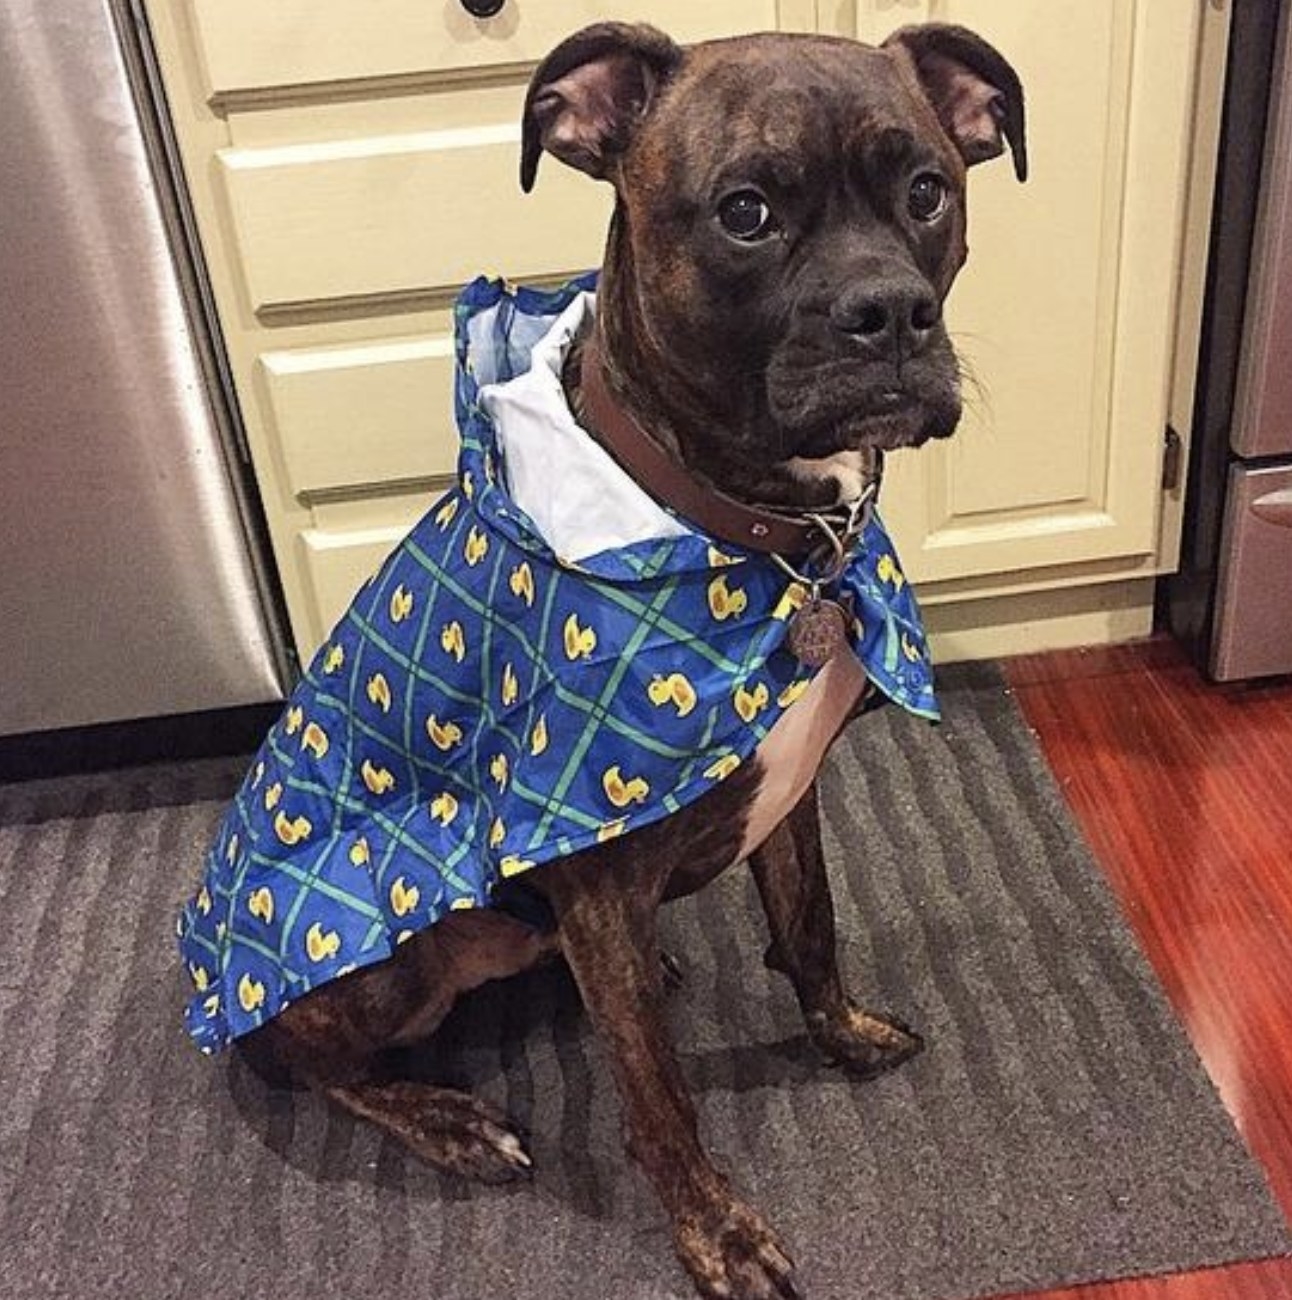 A dog wearing a blue raincoat with a rubber duck pattern on it